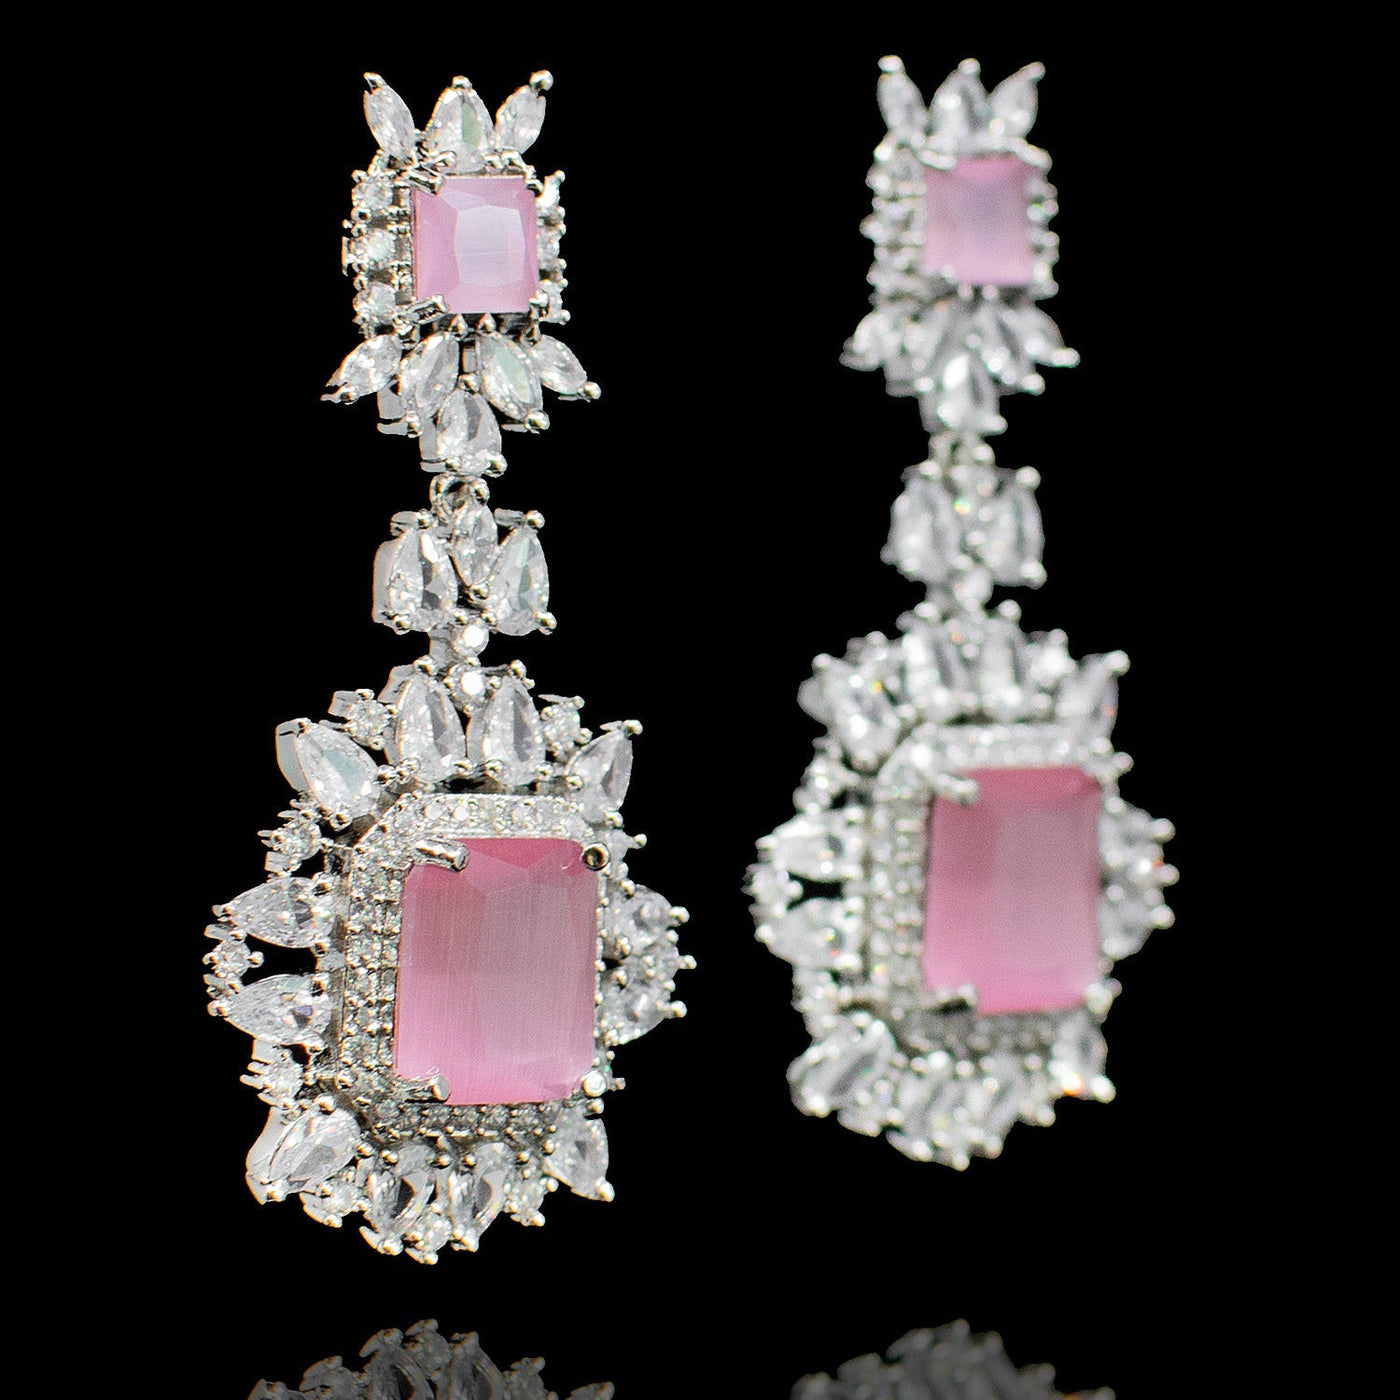 Veena Earrings Pink - Available in 3 Options